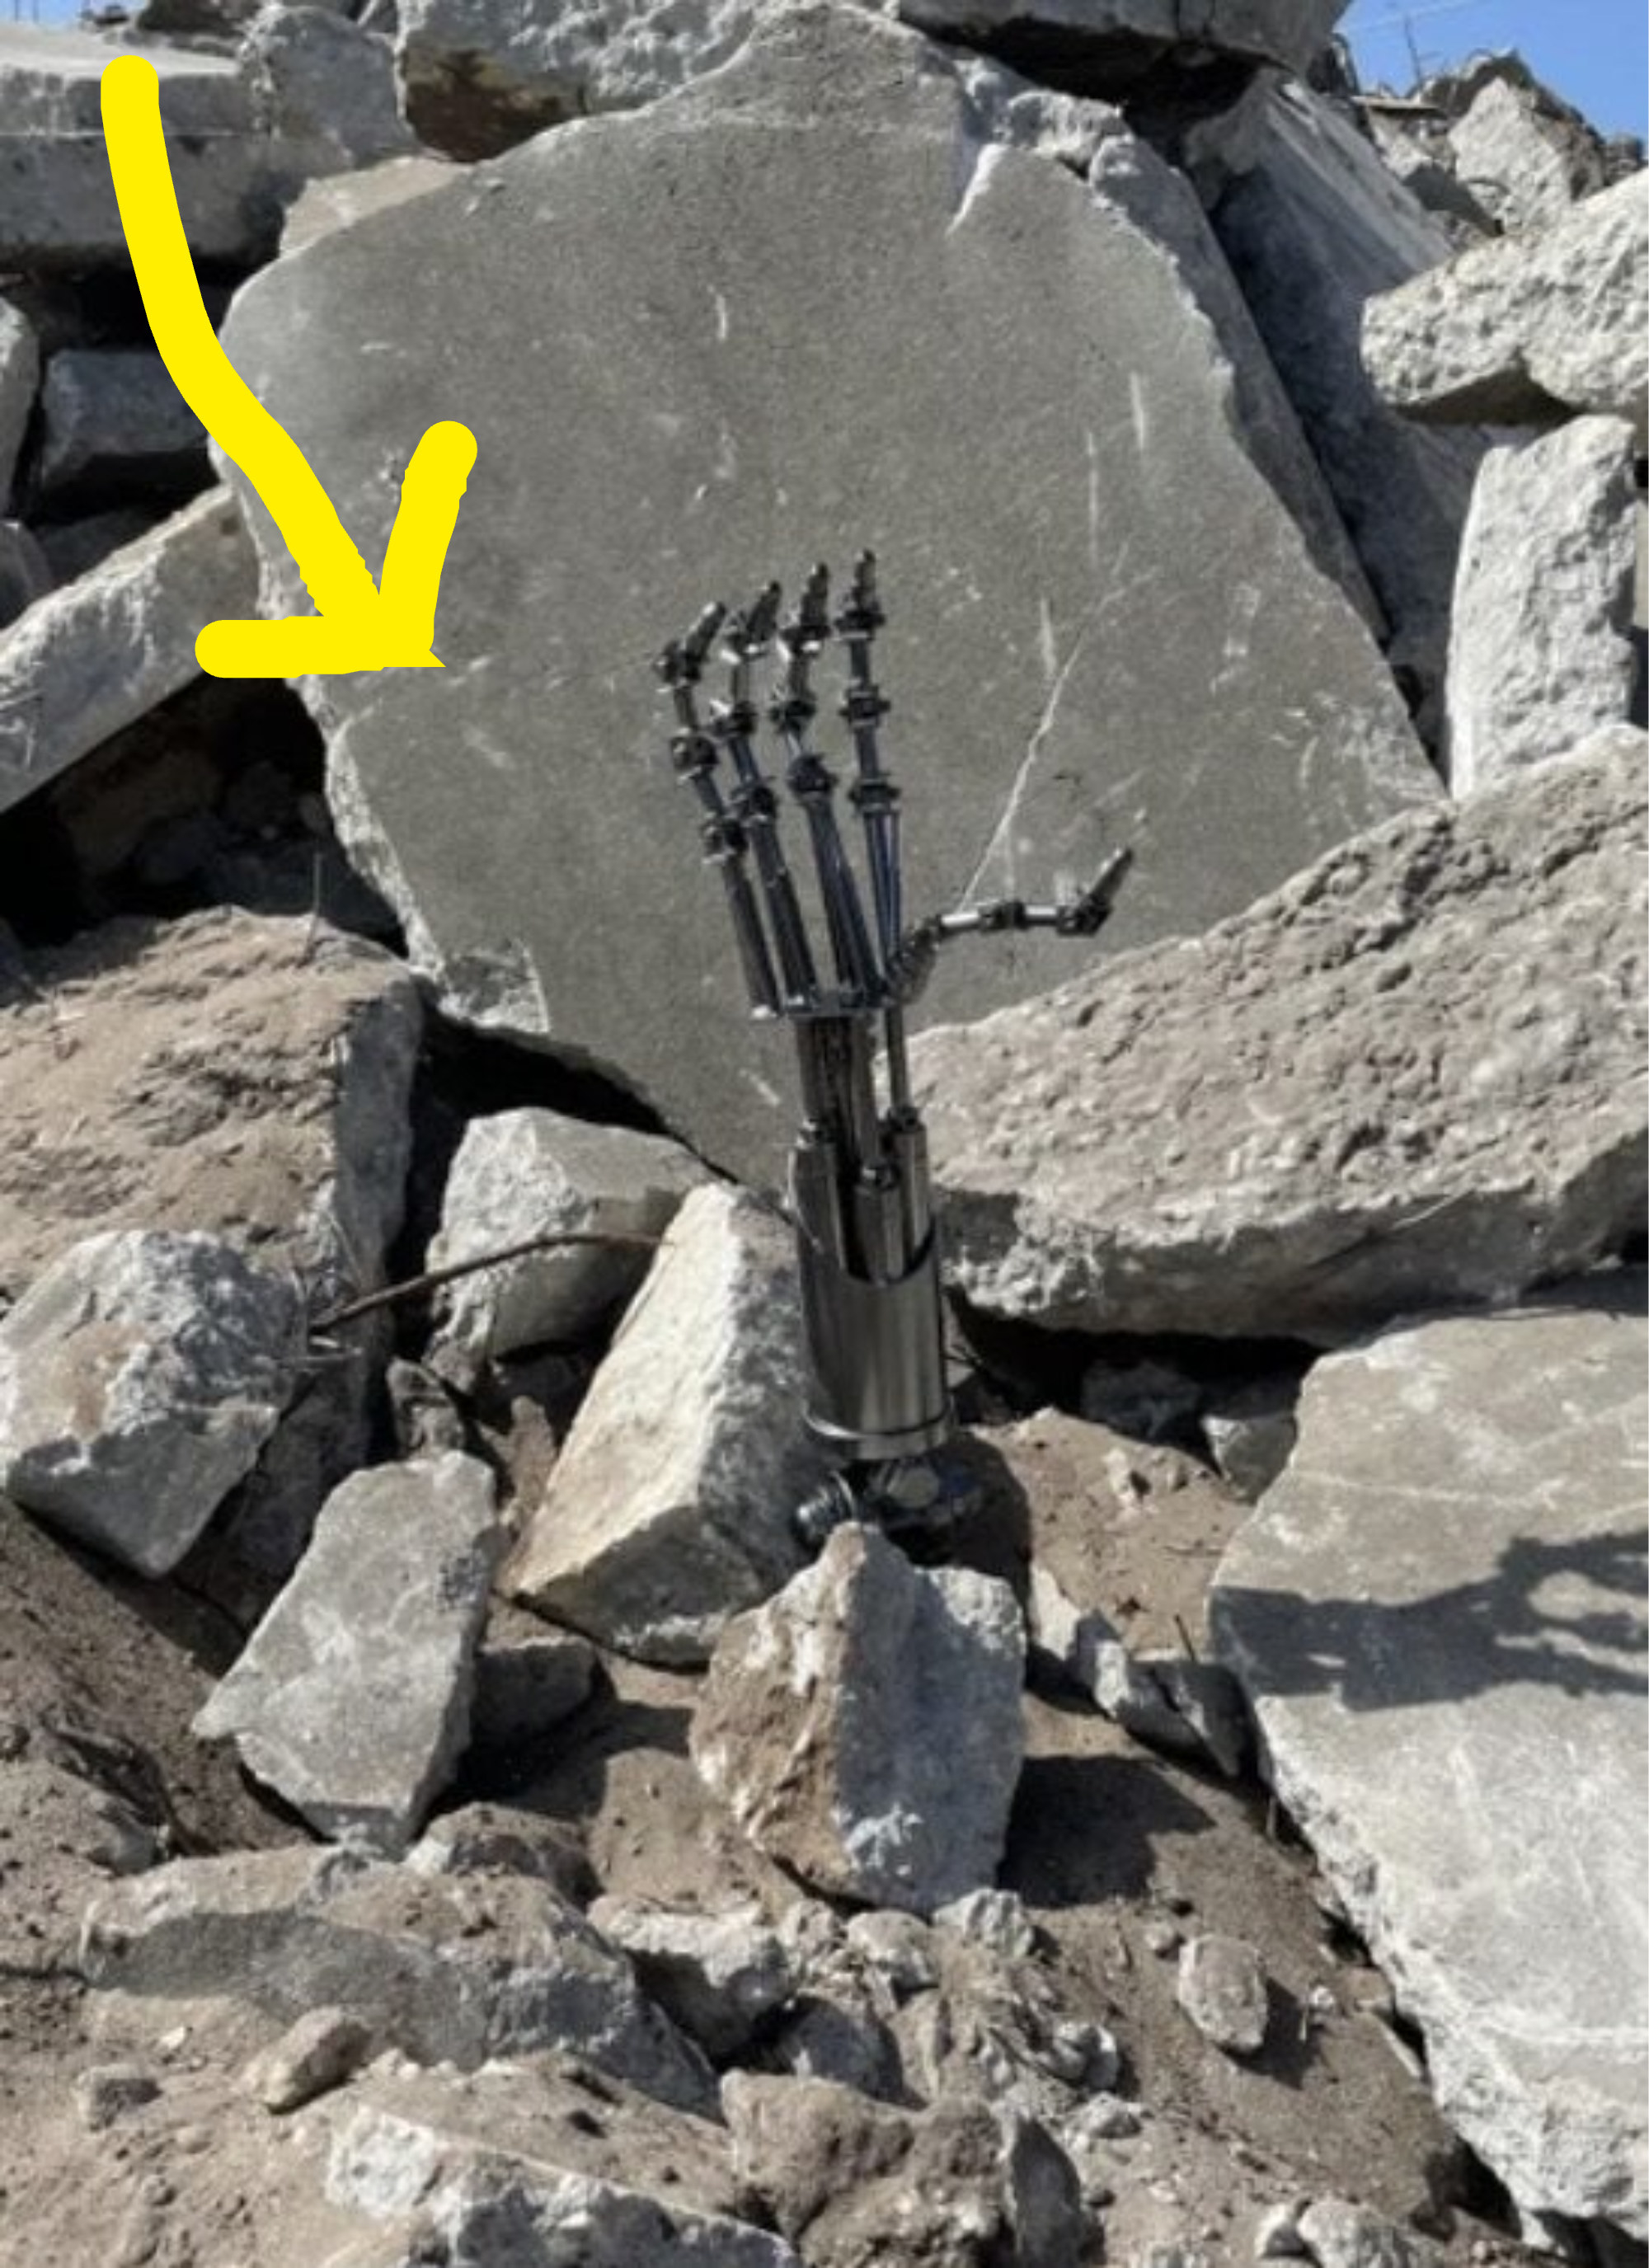 A Terminator arm in some rubble